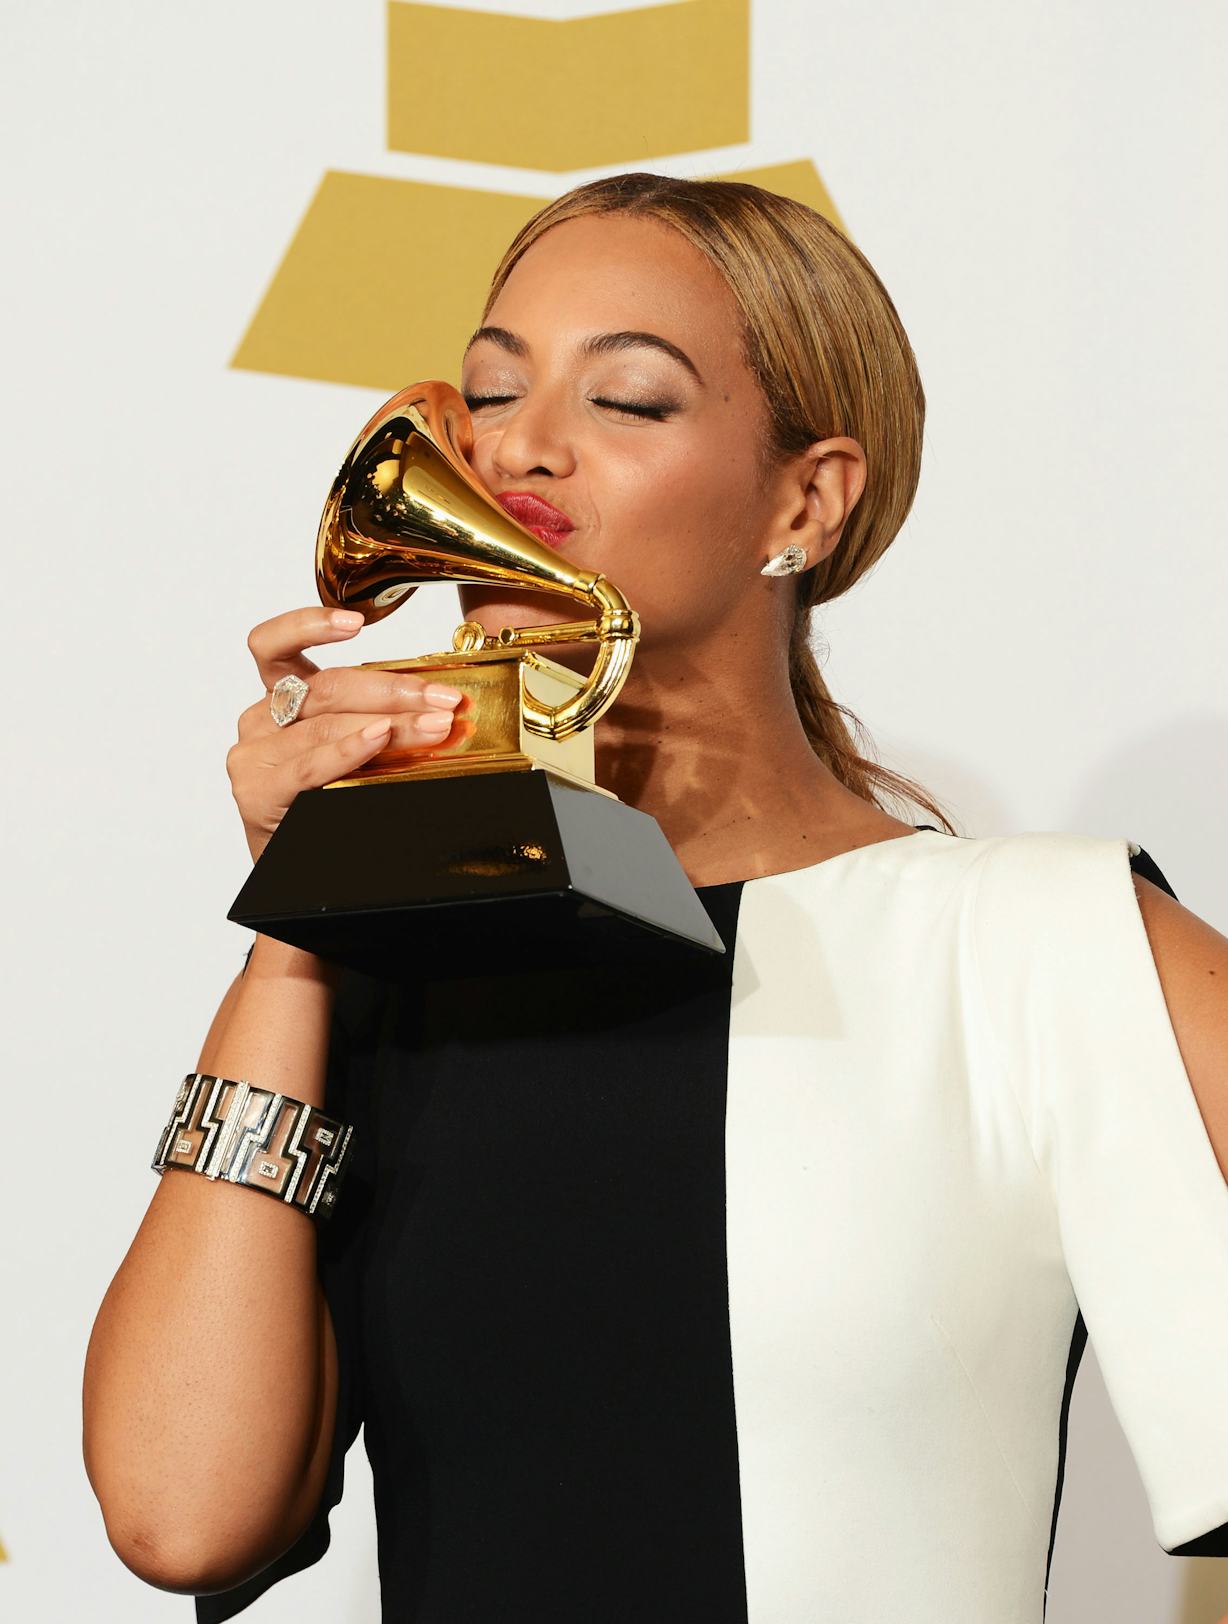 What Female Artists Hold the Most Grammy Nominations? Beyonce Leads the